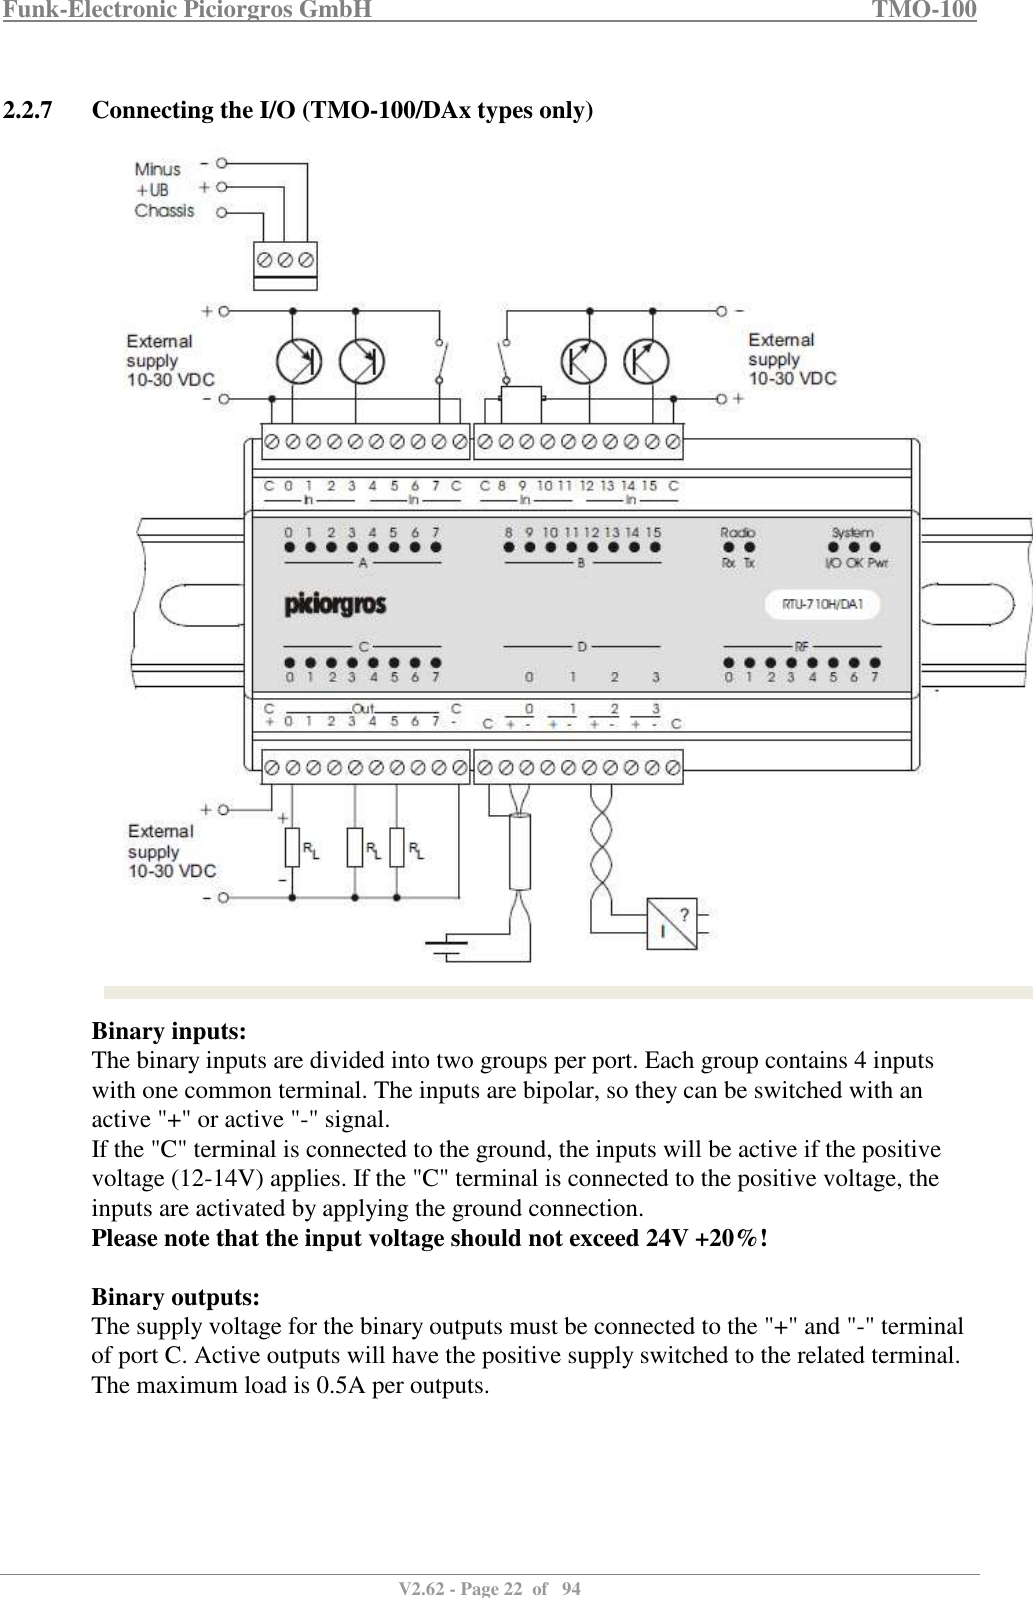 Funk-Electronic Piciorgros GmbH   TMO-100   V2.62 - Page 22  of   94   2.2.7 Connecting the I/O (TMO-100/DAx types only)   Binary inputs: The binary inputs are divided into two groups per port. Each group contains 4 inputs with one common terminal. The inputs are bipolar, so they can be switched with an active &quot;+&quot; or active &quot;-&quot; signal. If the &quot;C&quot; terminal is connected to the ground, the inputs will be active if the positive voltage (12-14V) applies. If the &quot;C&quot; terminal is connected to the positive voltage, the inputs are activated by applying the ground connection. Please note that the input voltage should not exceed 24V +20%!  Binary outputs: The supply voltage for the binary outputs must be connected to the &quot;+&quot; and &quot;-&quot; terminal of port C. Active outputs will have the positive supply switched to the related terminal. The maximum load is 0.5A per outputs.  